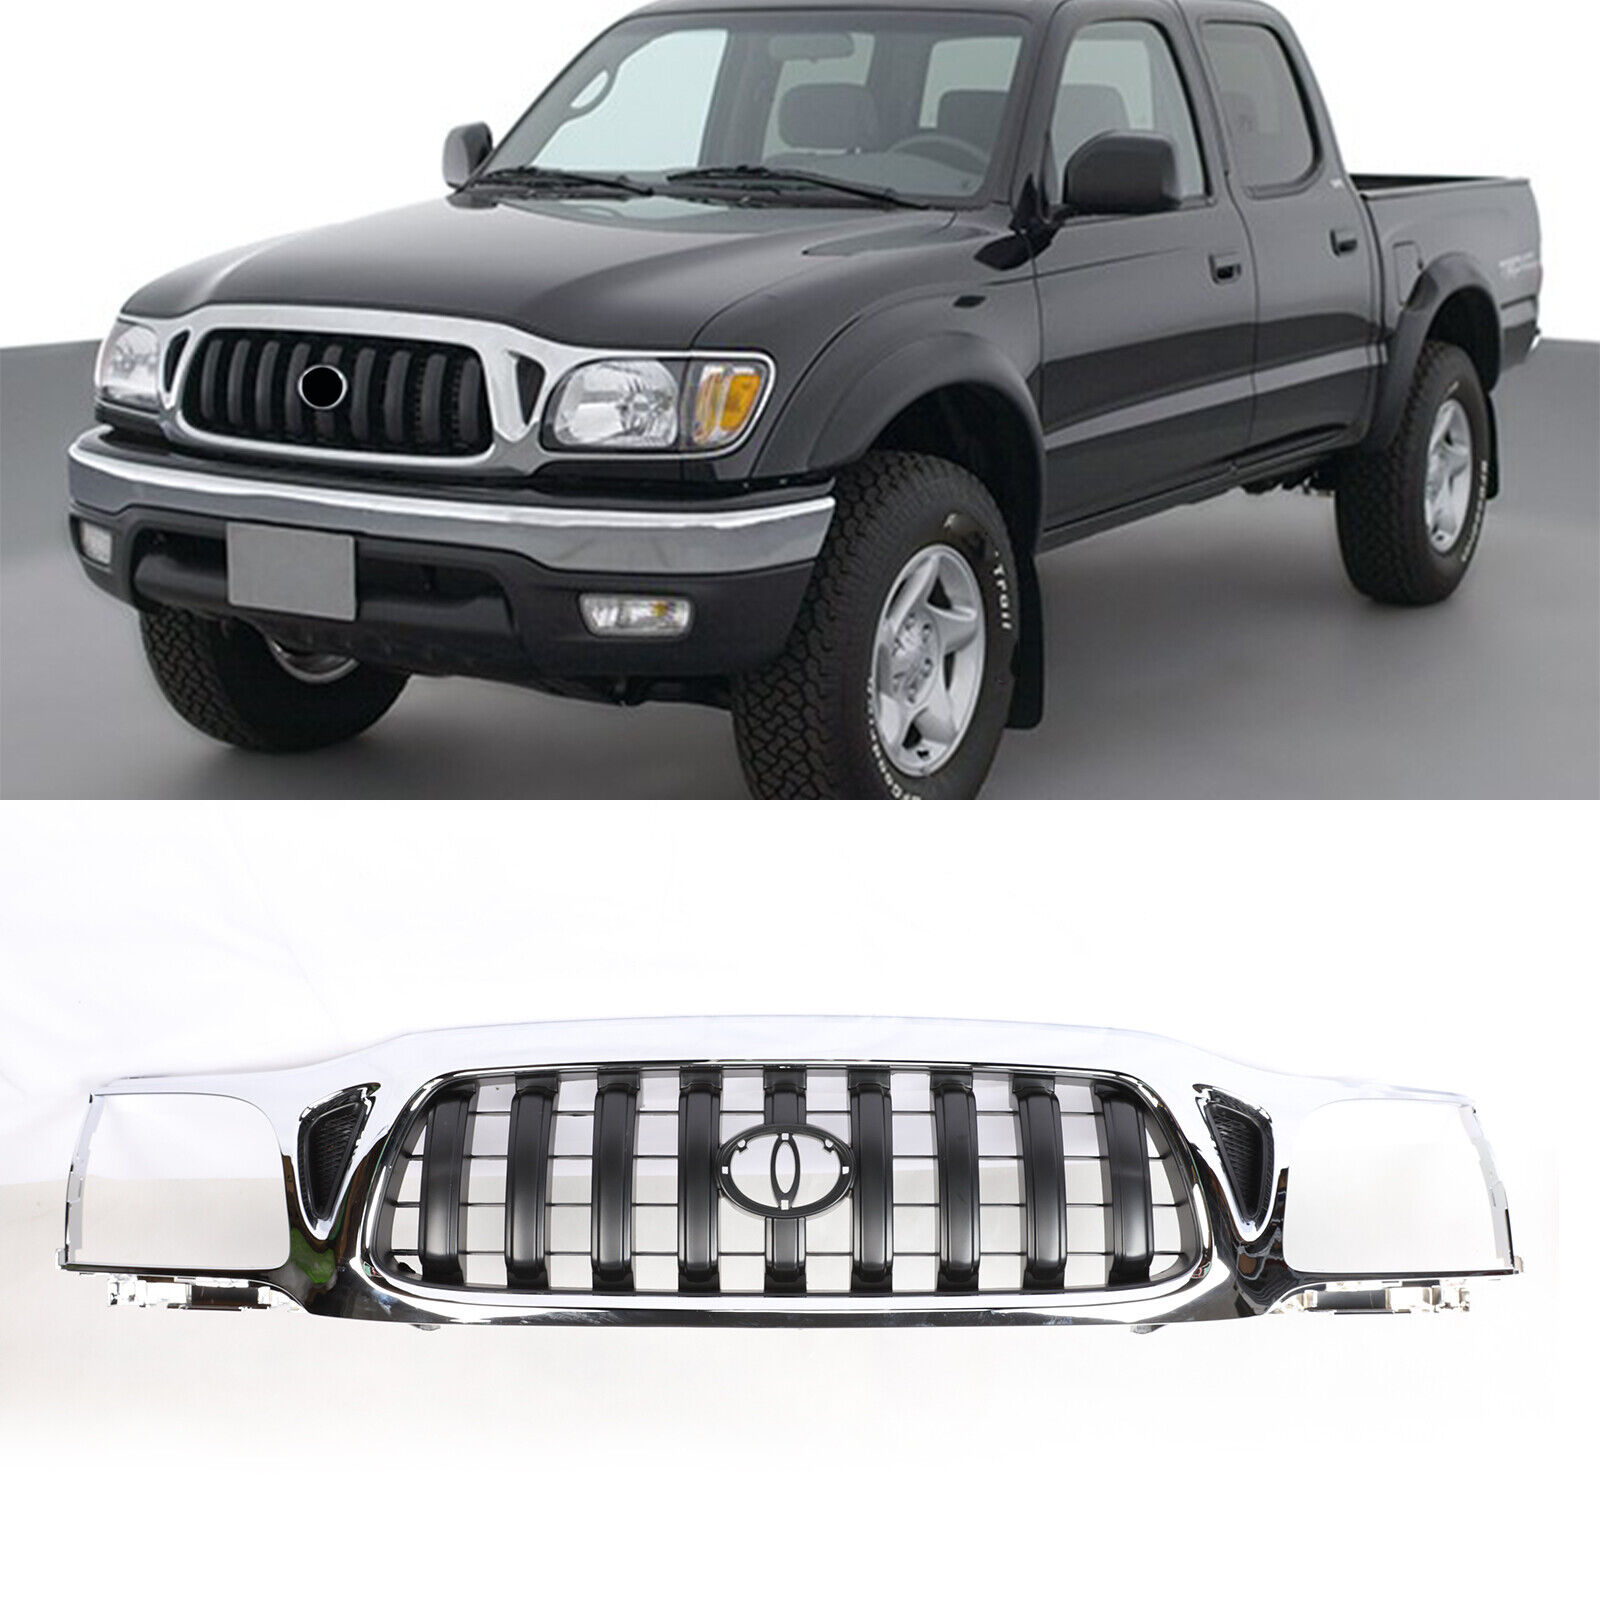 Chrome Front Bumper Grille For Toyota Tacoma 2001 2002 2003 2004 Grill Lower